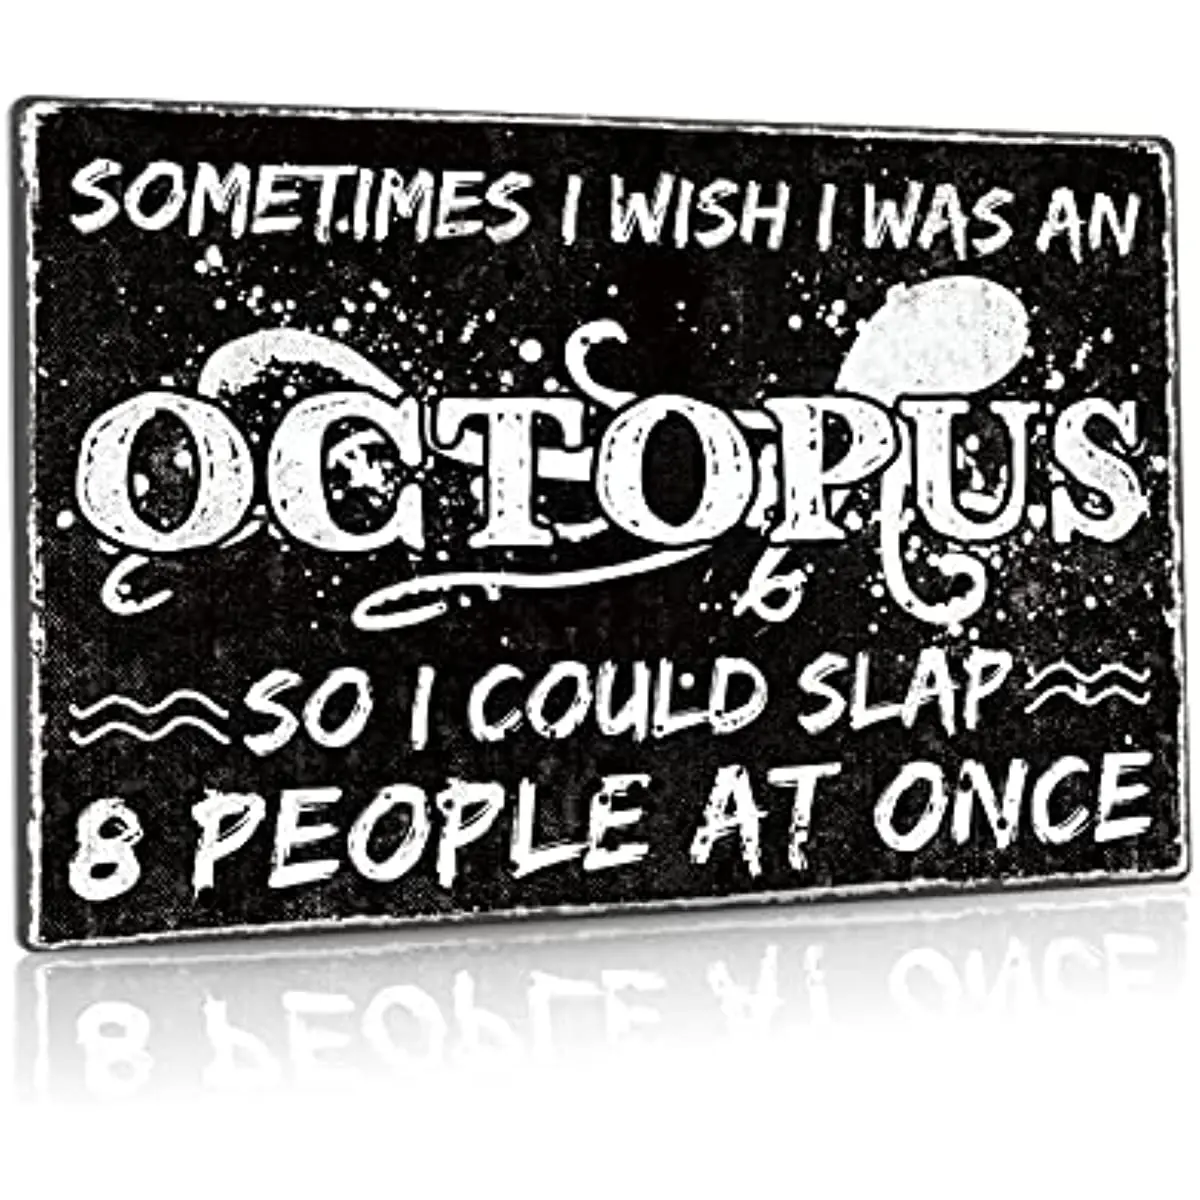 

Funny Sarcastic Sign Sometimes I Wish I Was an Octopus So I could Slap 8 People at Once Metal Wall Sign